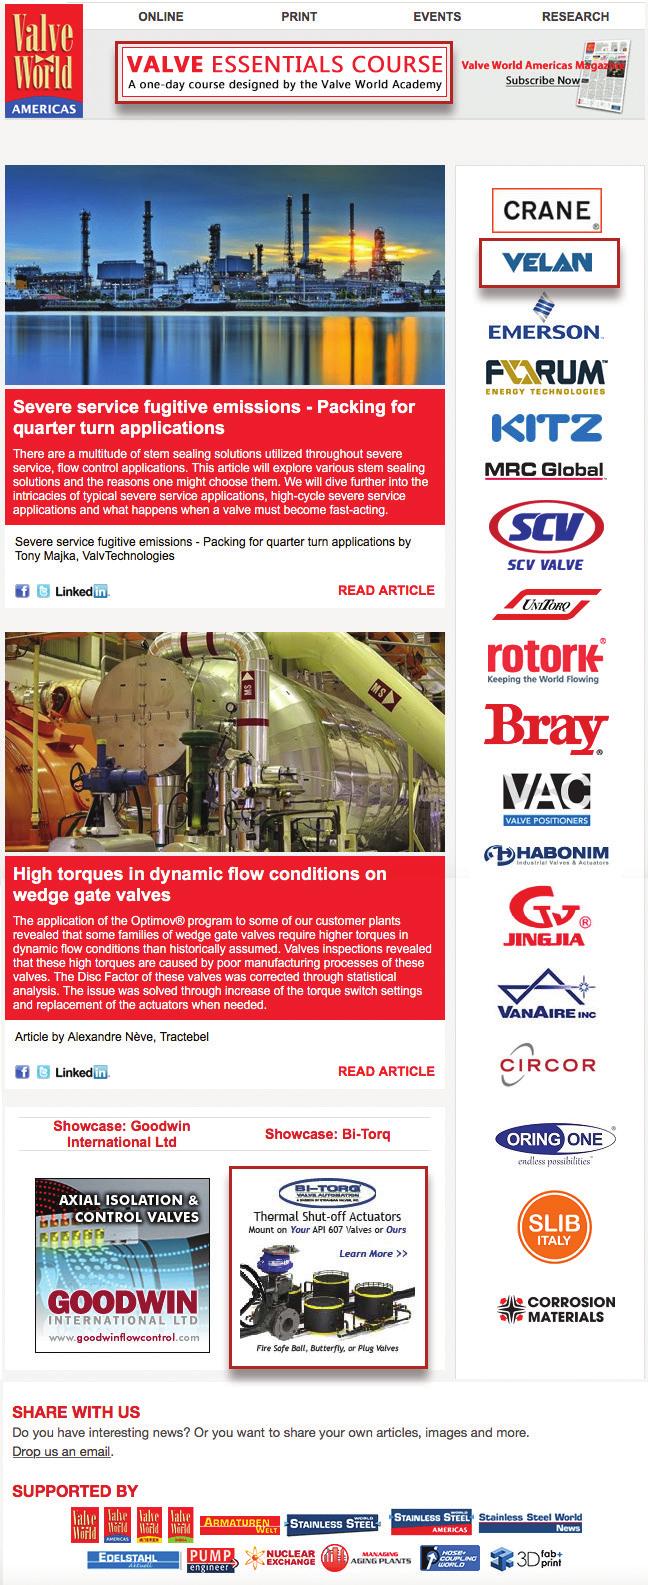 Online Newsletter VALVE WORLD AMERICAS NEWSLETTER The Valve World Americas News Update is sent weekly to over 23,000 recipients. It is free of charge and appears in your mailbox every second week.